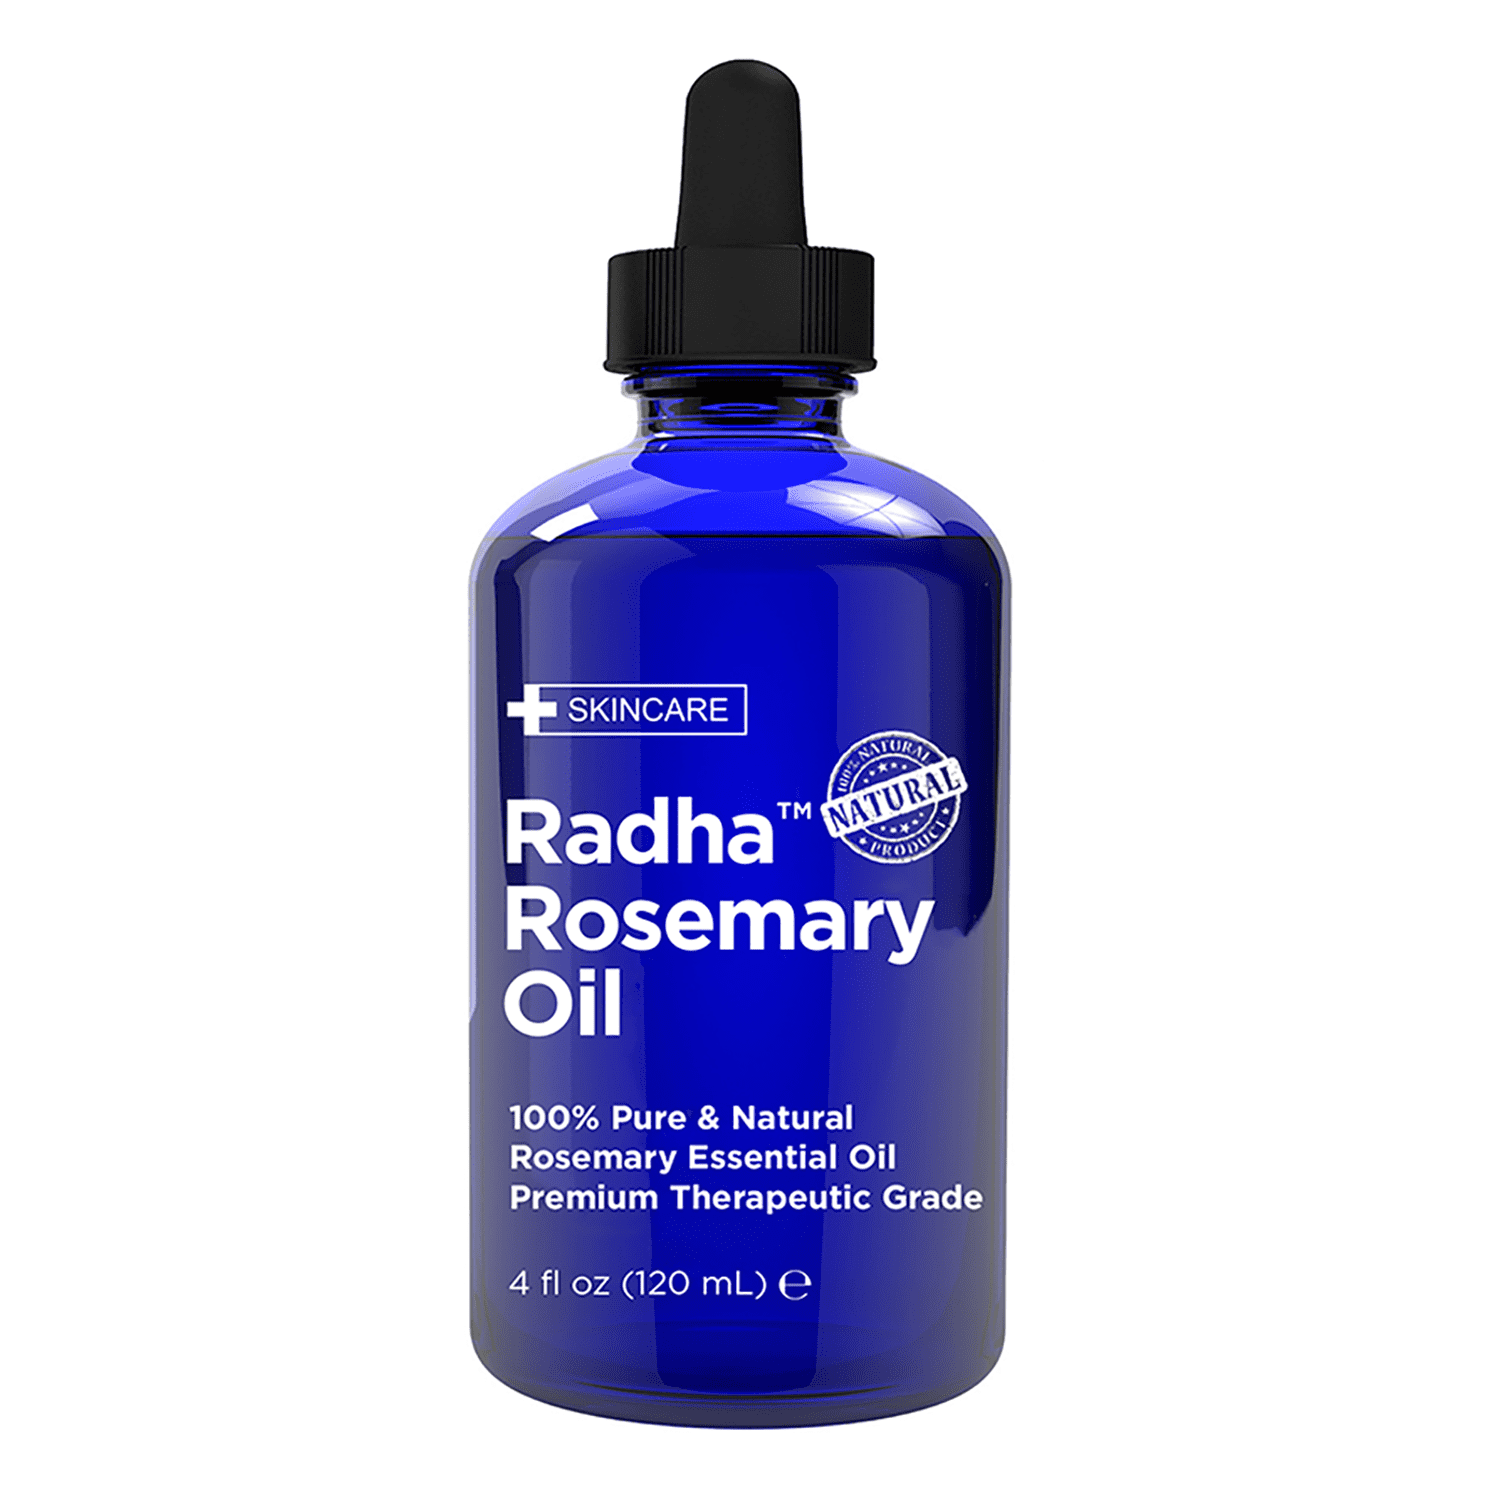 Pure Rosemary Oil for Hair and Body - Maple Holistics Rosemary Essential  Oil for Skin and Hair Oil for Scalp - Natural Aromatherapy Essential Oils  for Diffusers and Humidifiers, 1 fl oz 